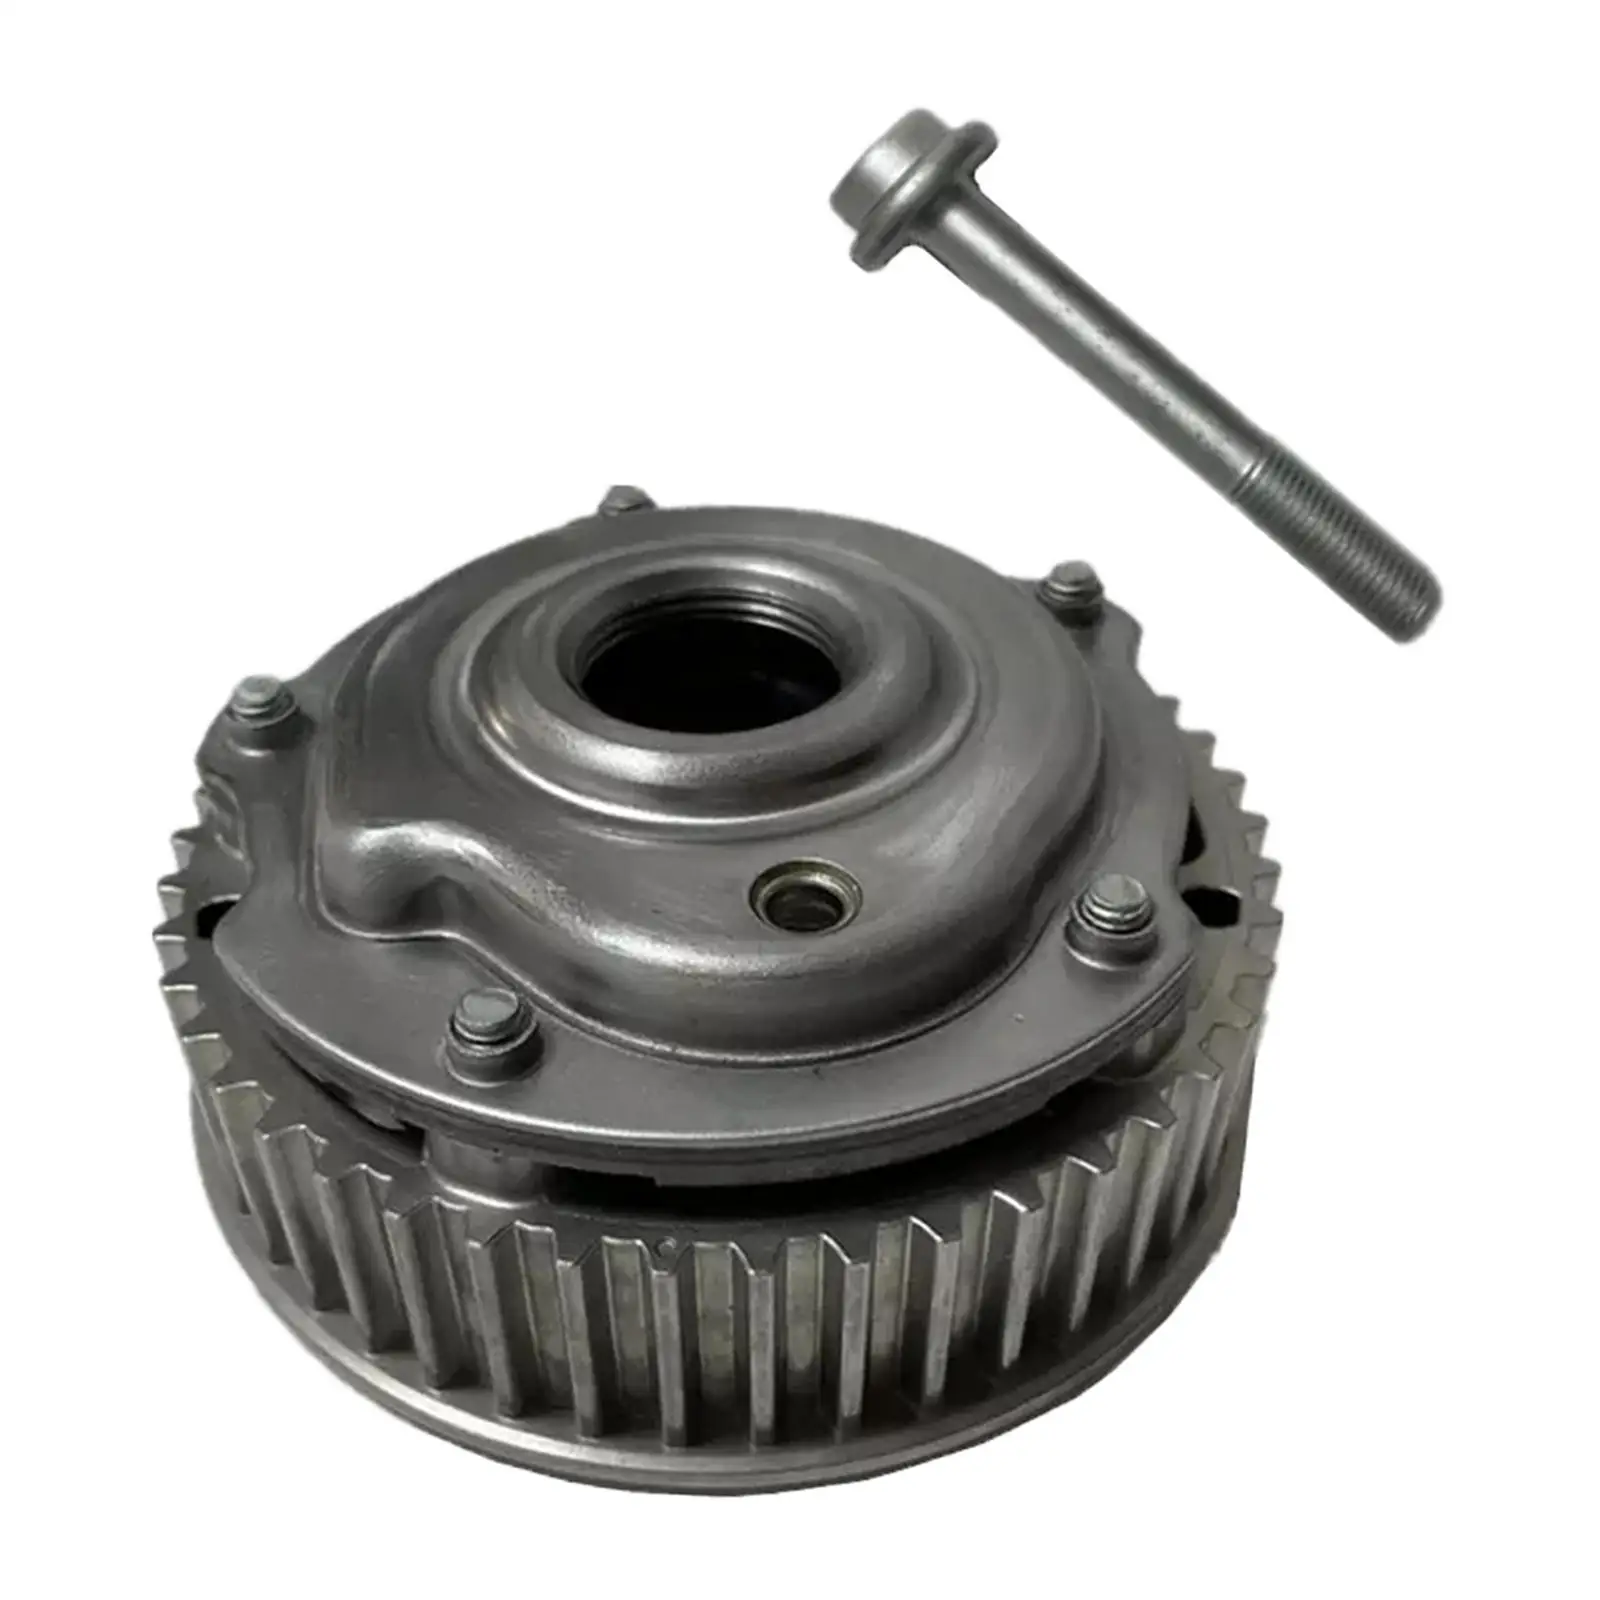 

Engine Timing Camshaft Gear High Performance Intake Exhaust cam Sprocket Replacement 71744384 5636631 55567048 for Buick